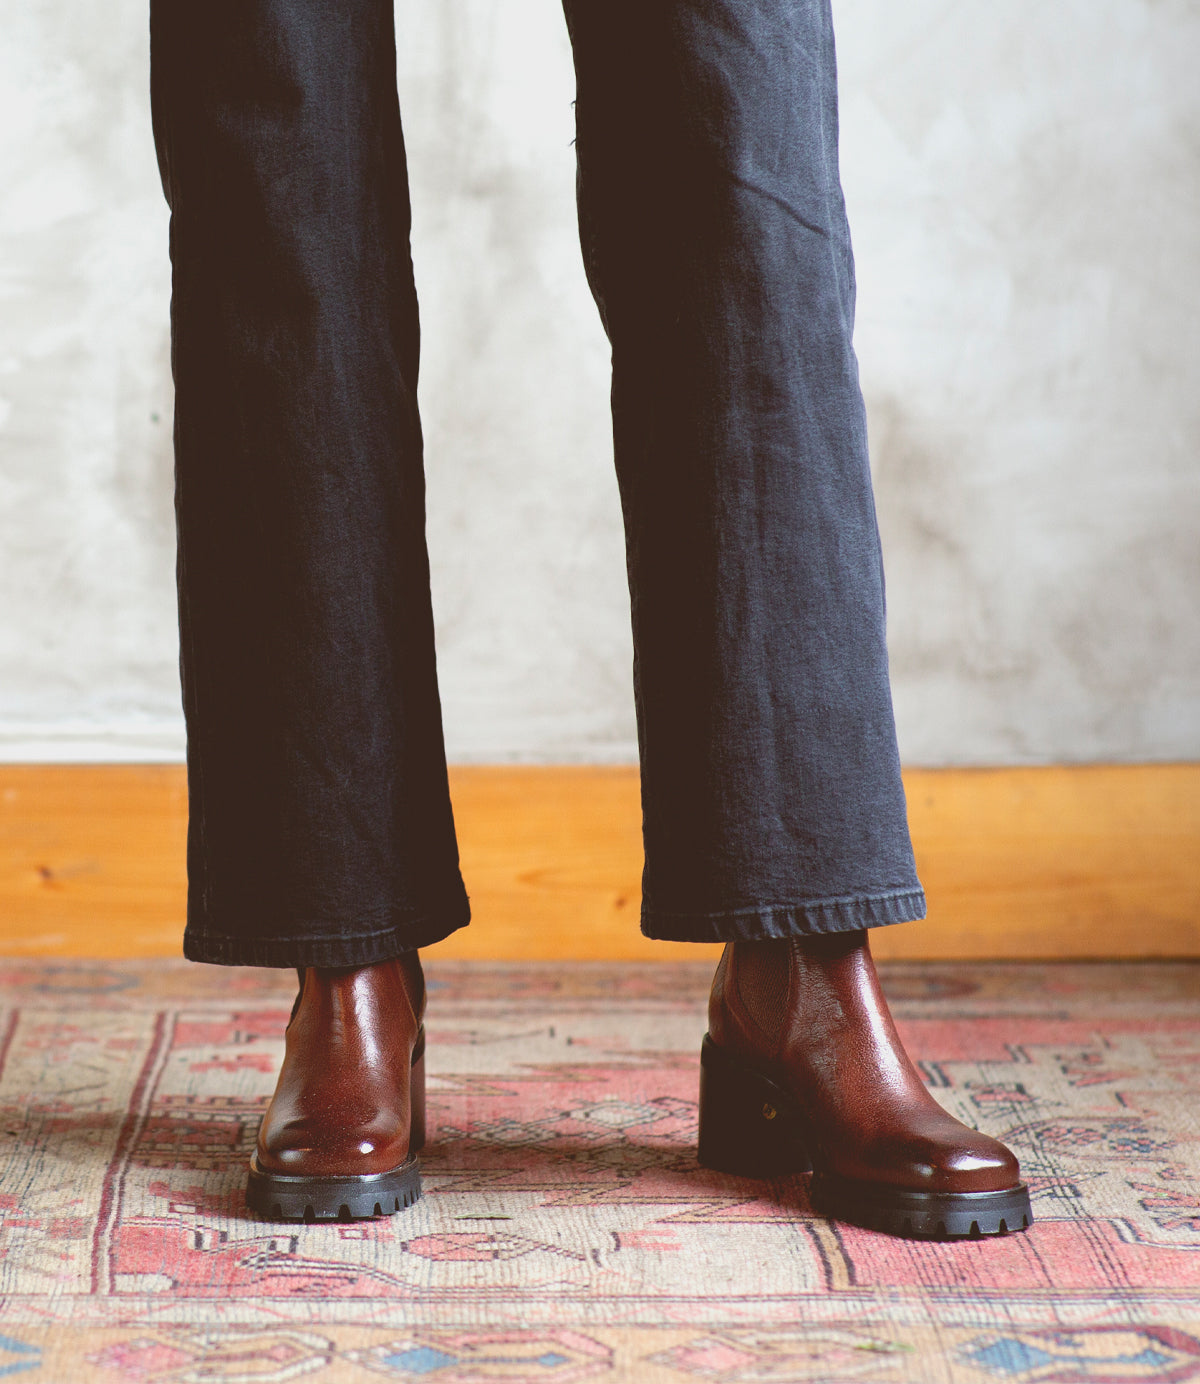 A woman wearing jeans and Bed Stu Chelsea boots on a rug.